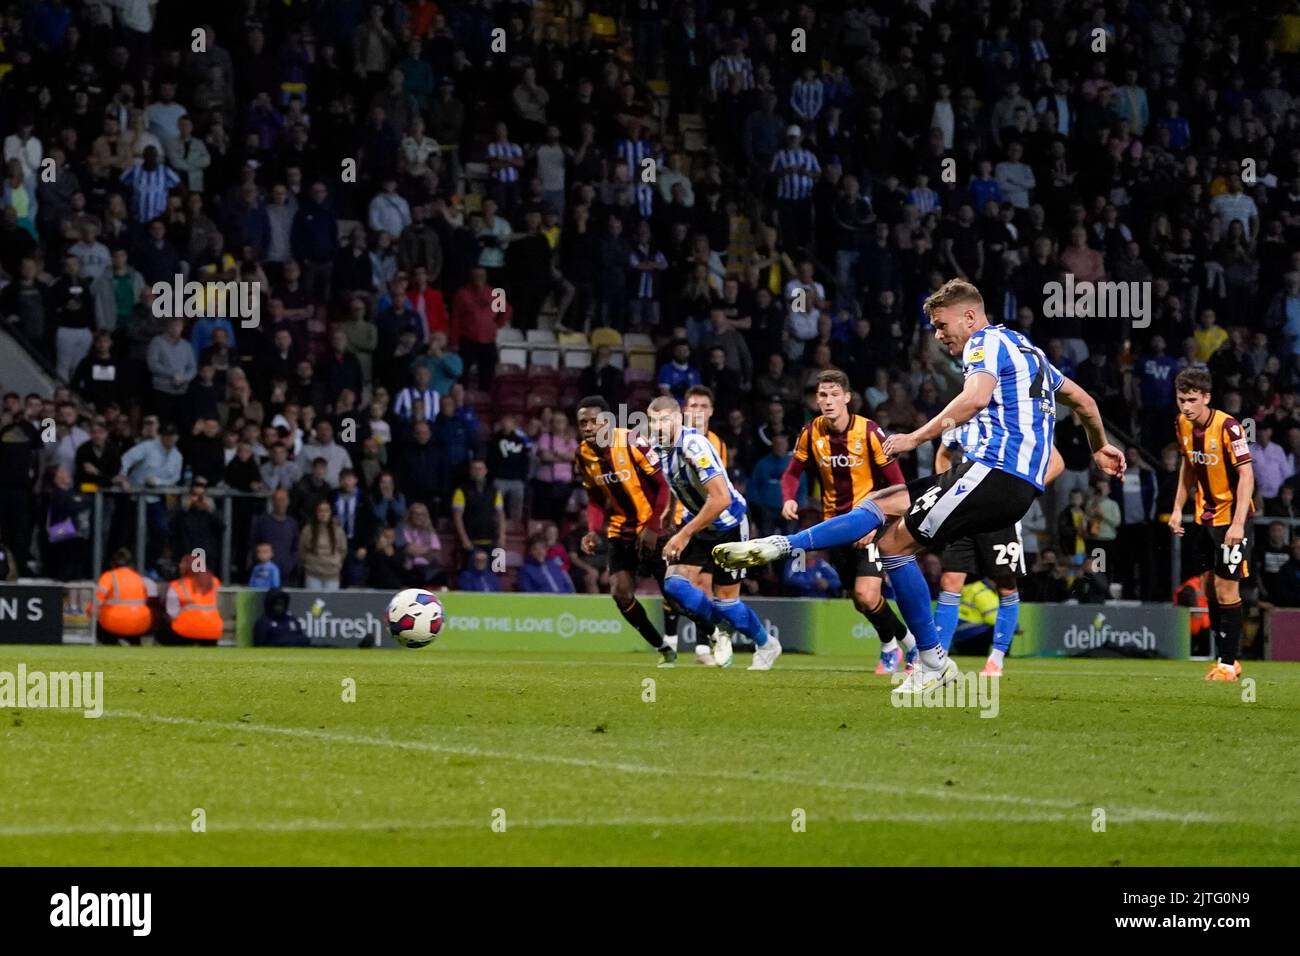 Michael Smith #24 of Sheffield Wednesday scores a penalty to go 1-0 up Stock Photo